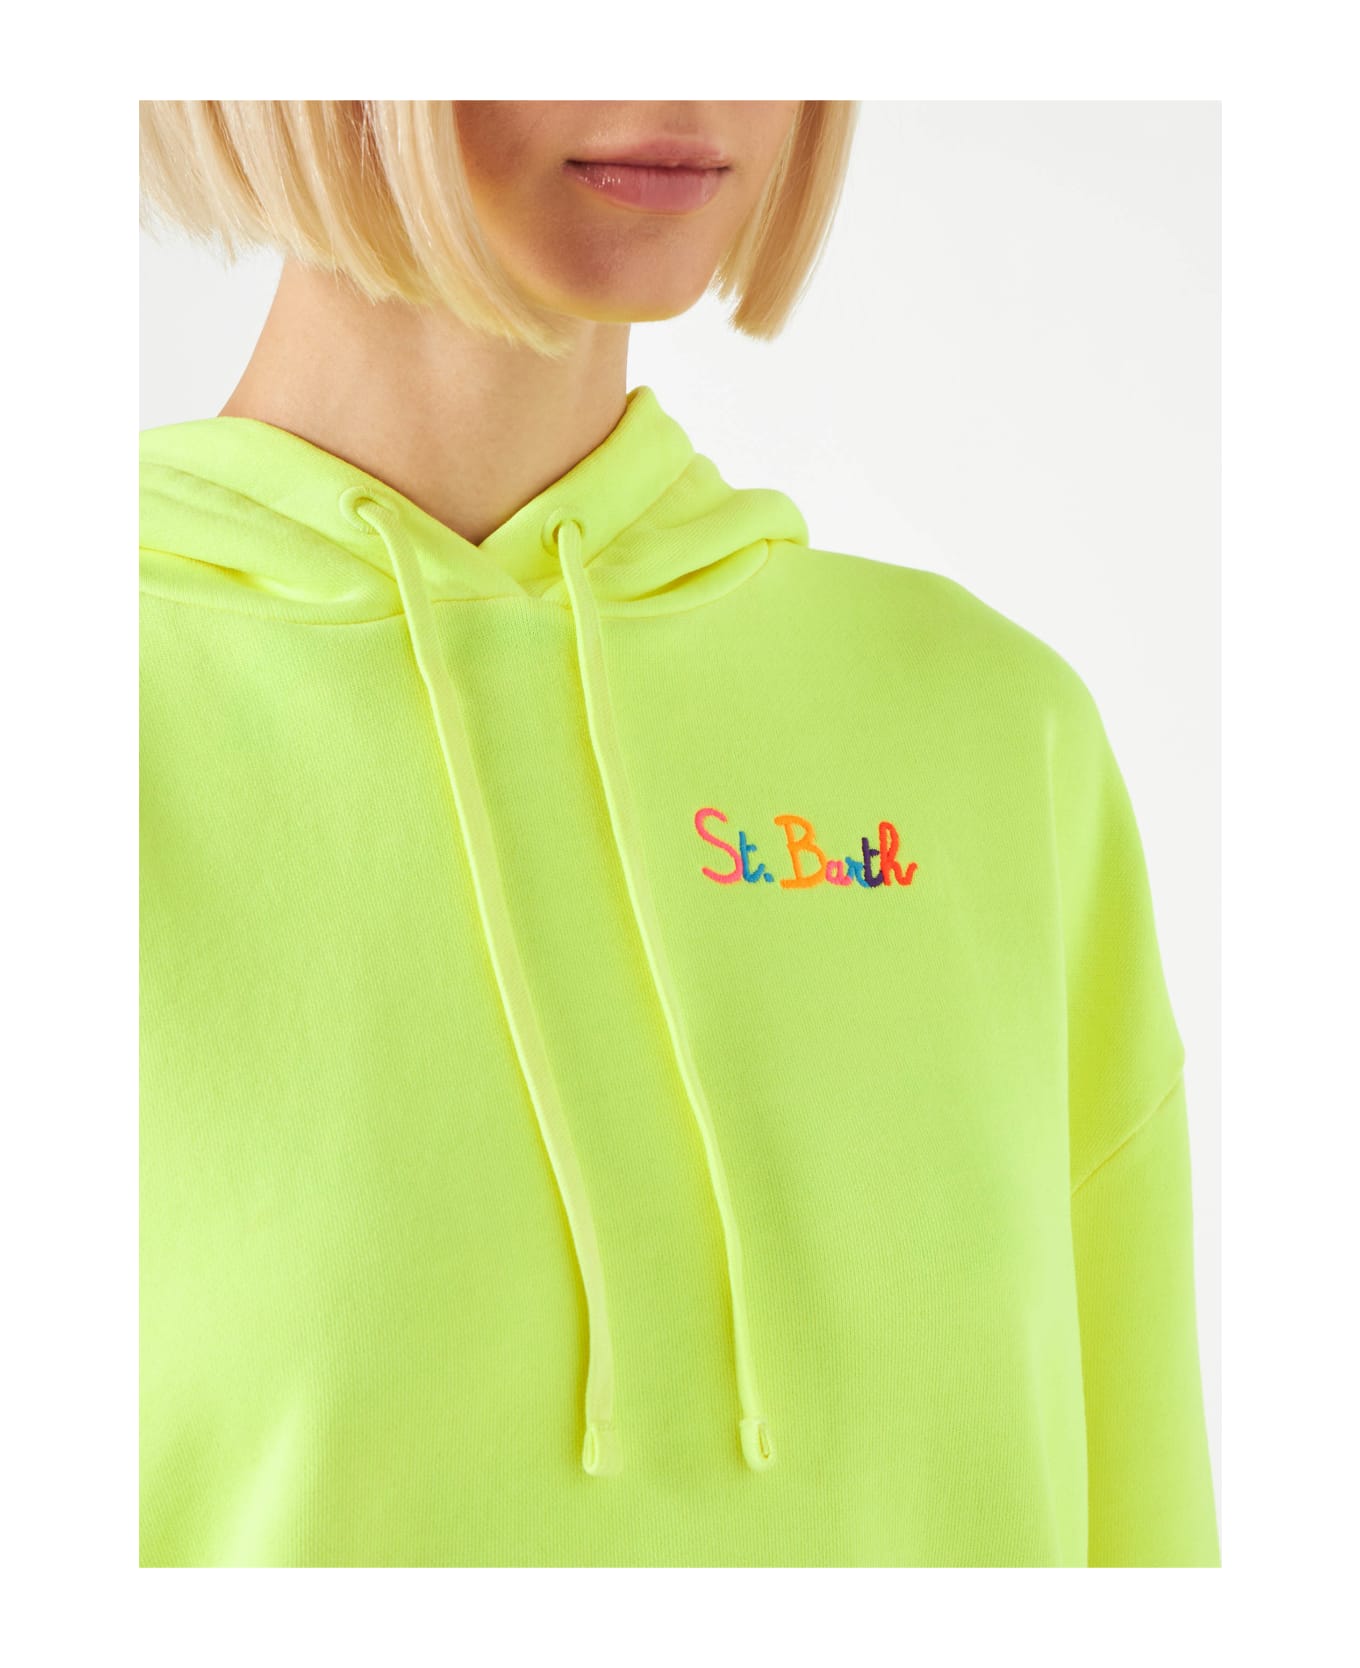 MC2 Saint Barth Fluo Yellow Hoodie With St. Barth Embroidery - YELLOW